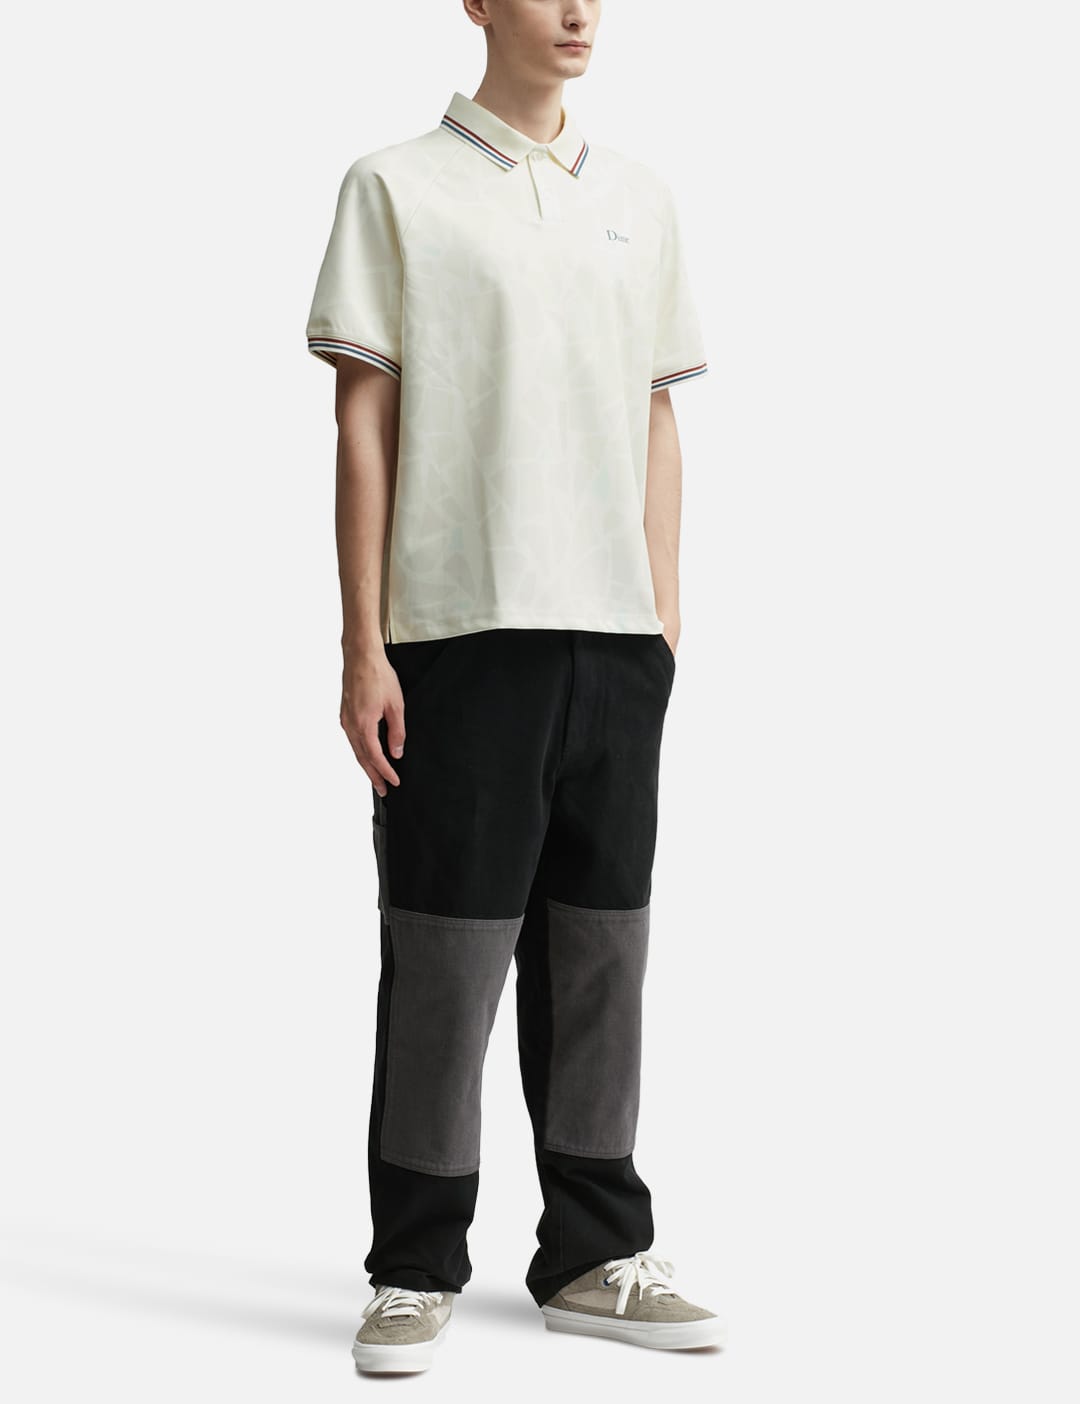 Dime - Ceramic Polo Shirt | HBX - Globally Curated Fashion and